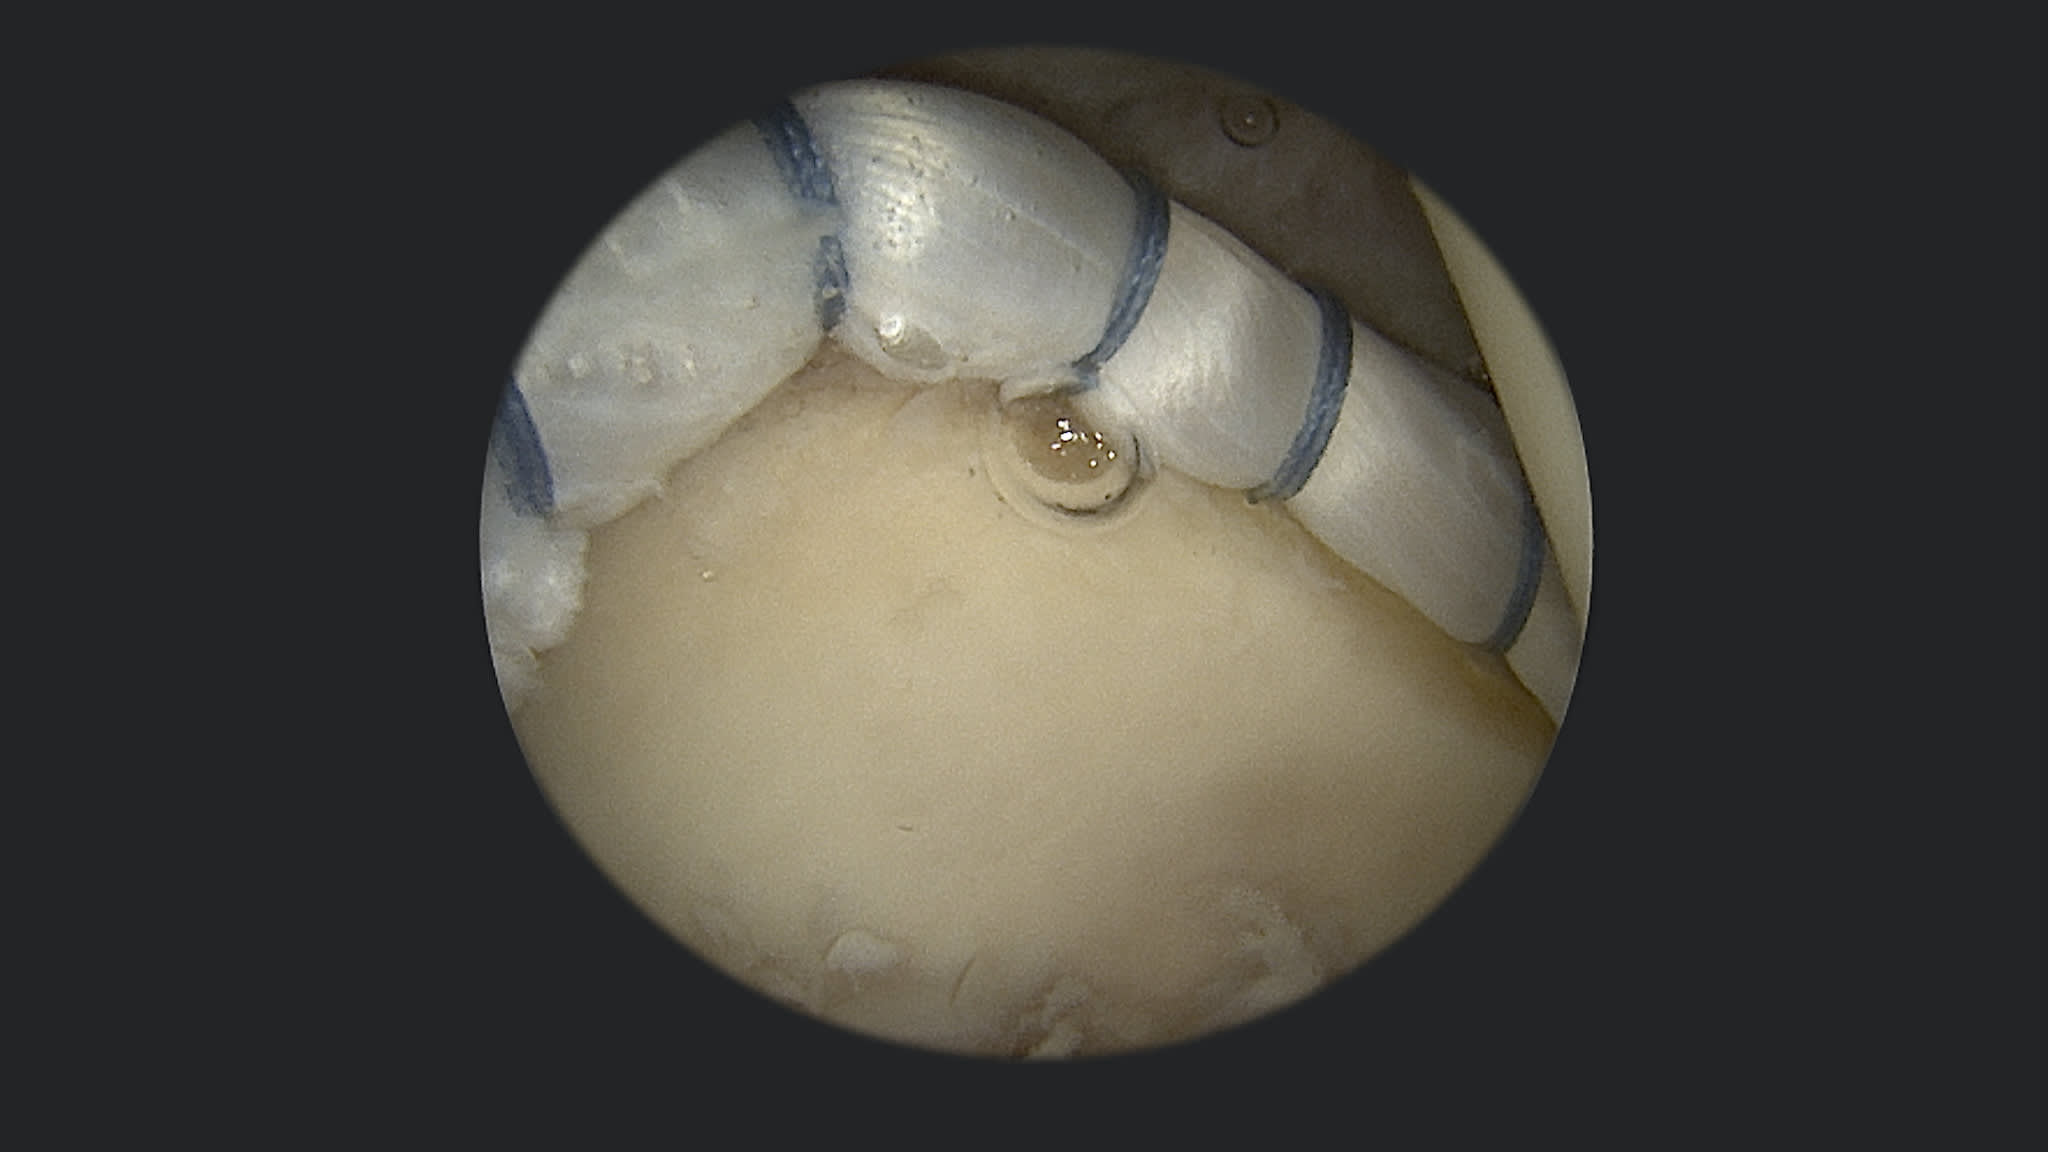 Labral Reconstruction With Graft Pull-Through Method Using Knotless 1.8 Hip FiberTak® Anchors